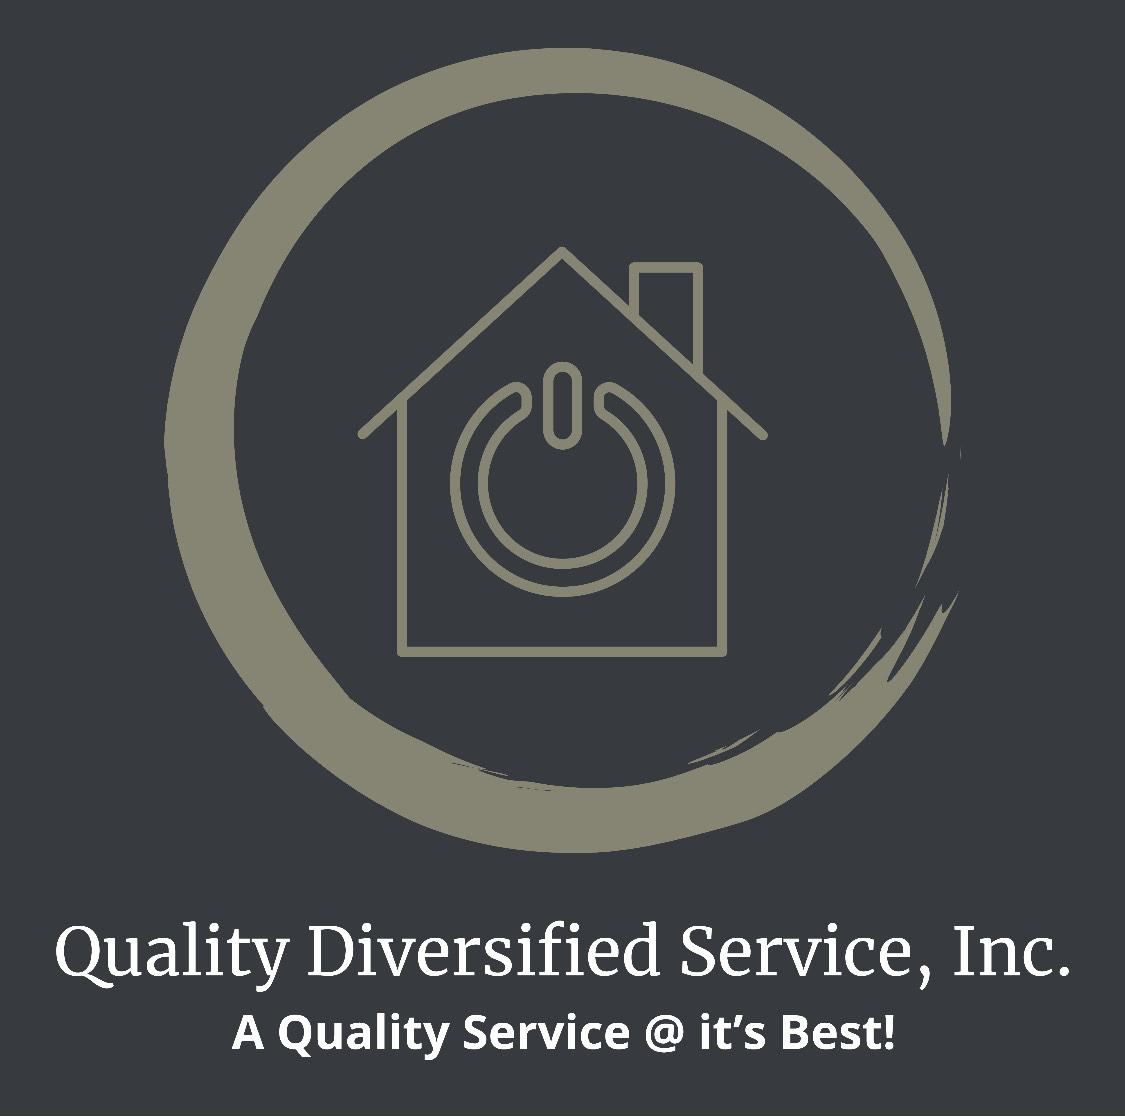 Quality Diversified Service, Inc